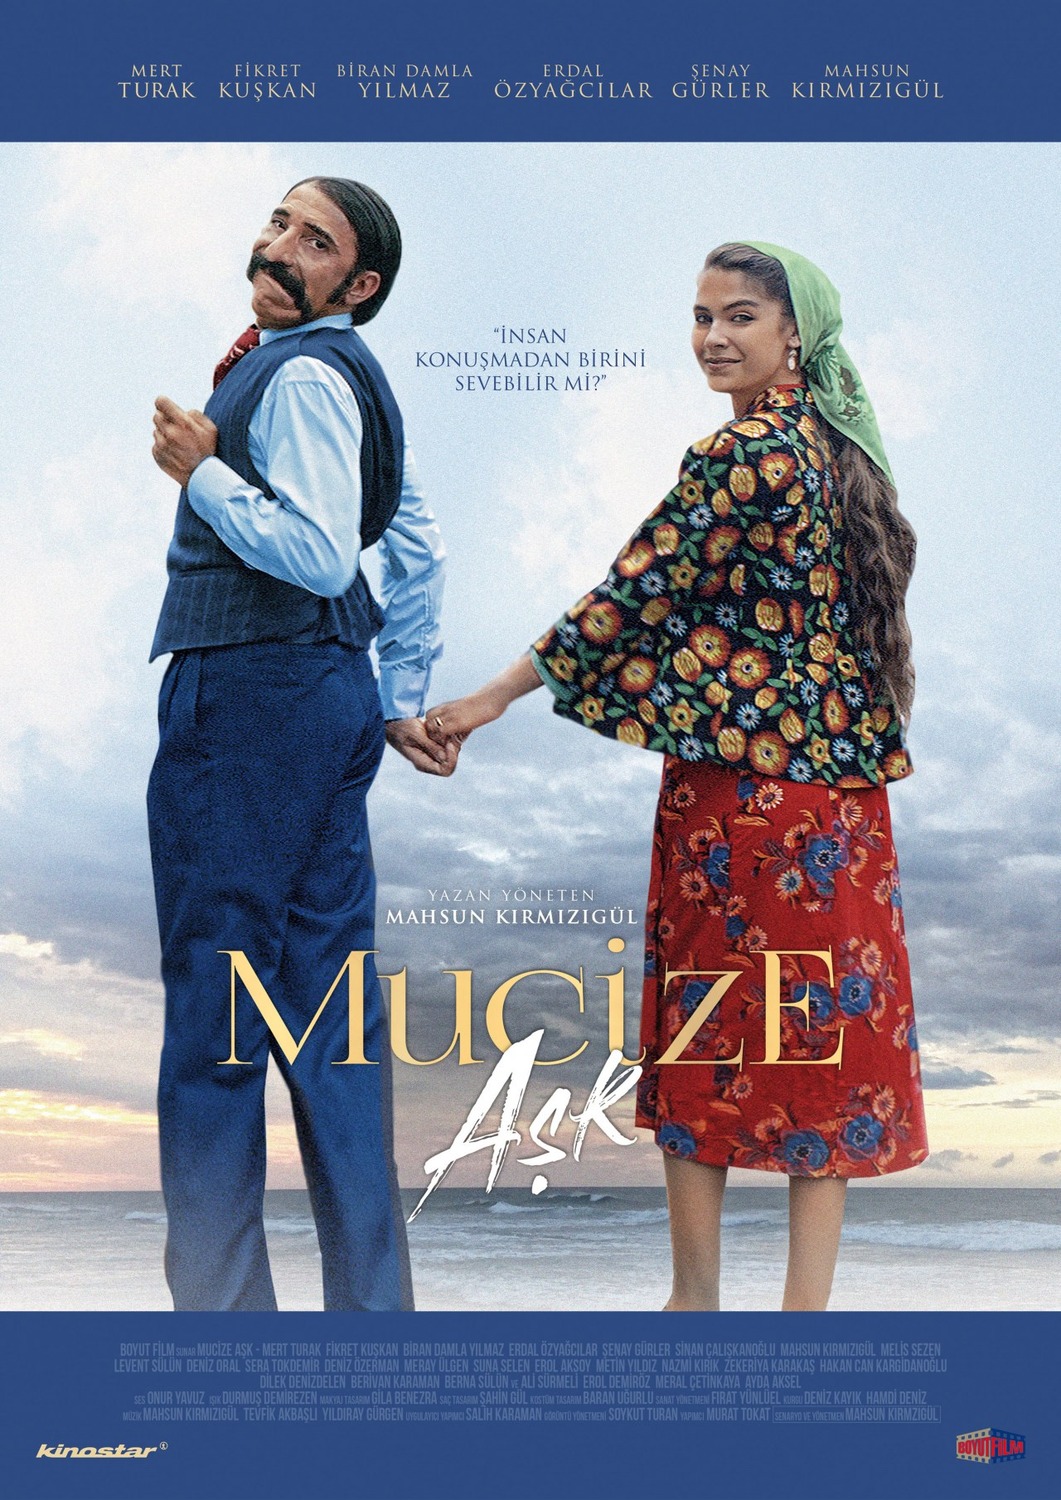 Extra Large Movie Poster Image for Mucize 2: Ask (#1 of 4)